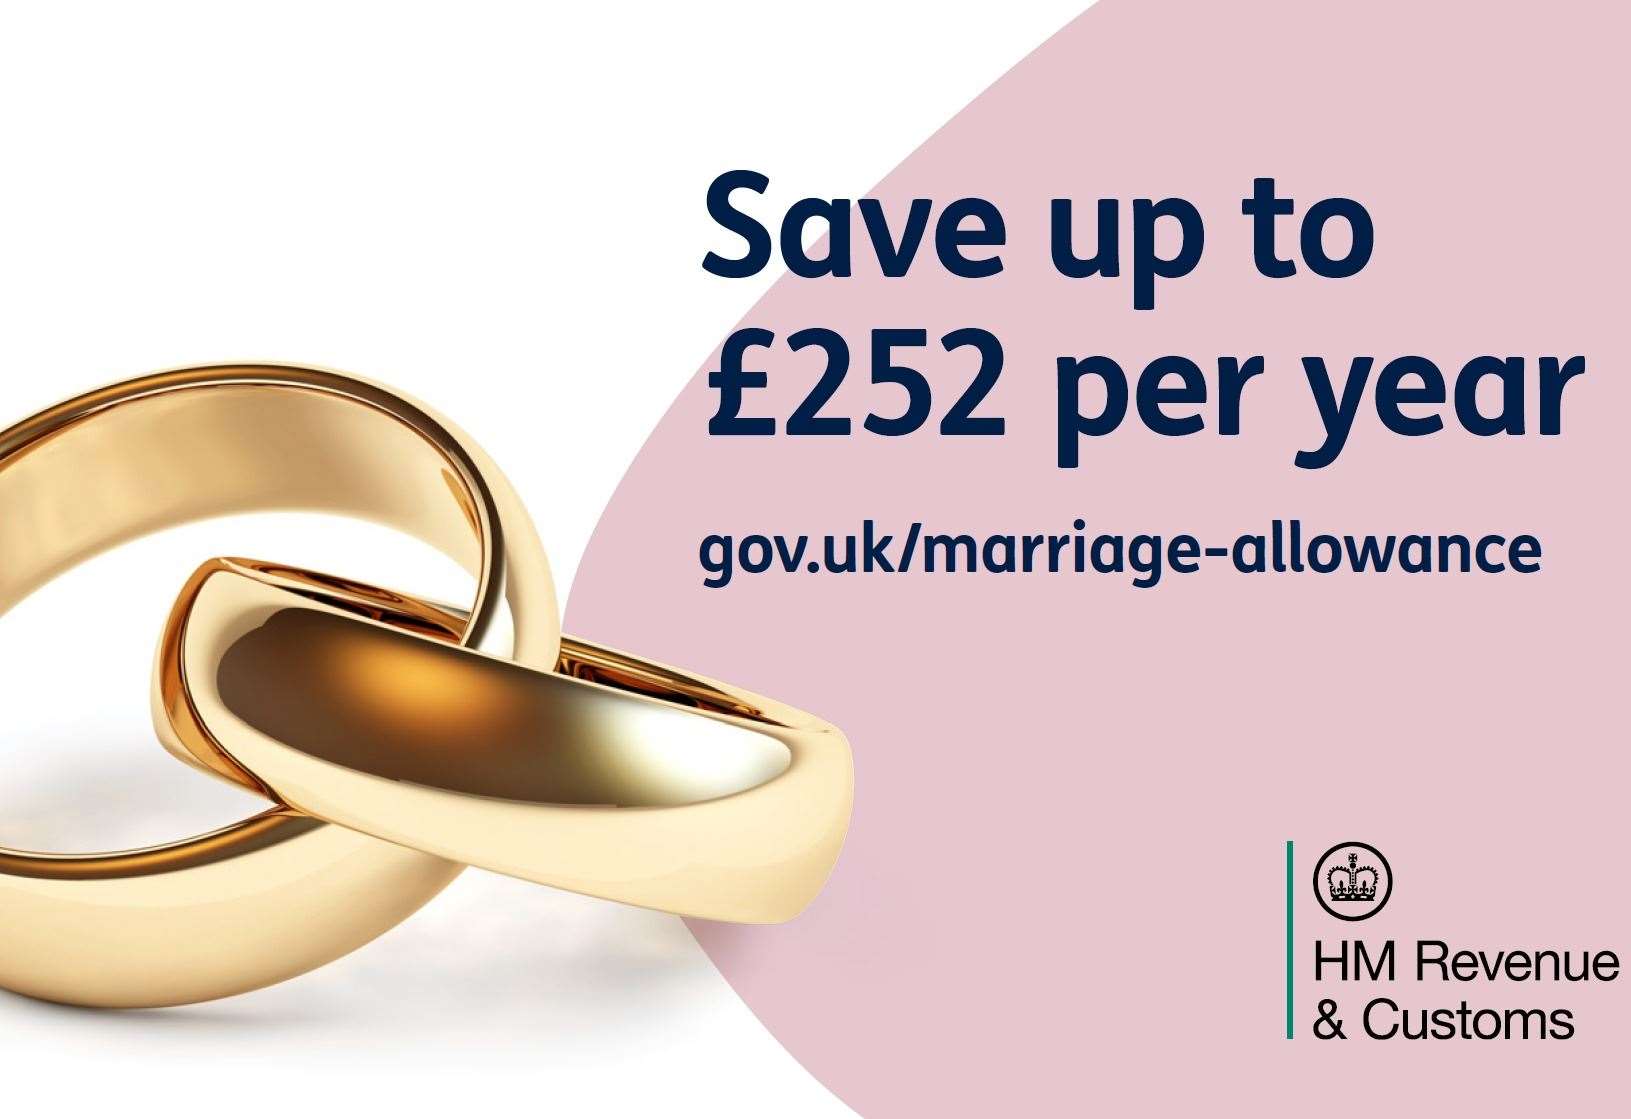 hmrc-are-reminding-married-couples-and-civil-partnerships-to-sign-up-to